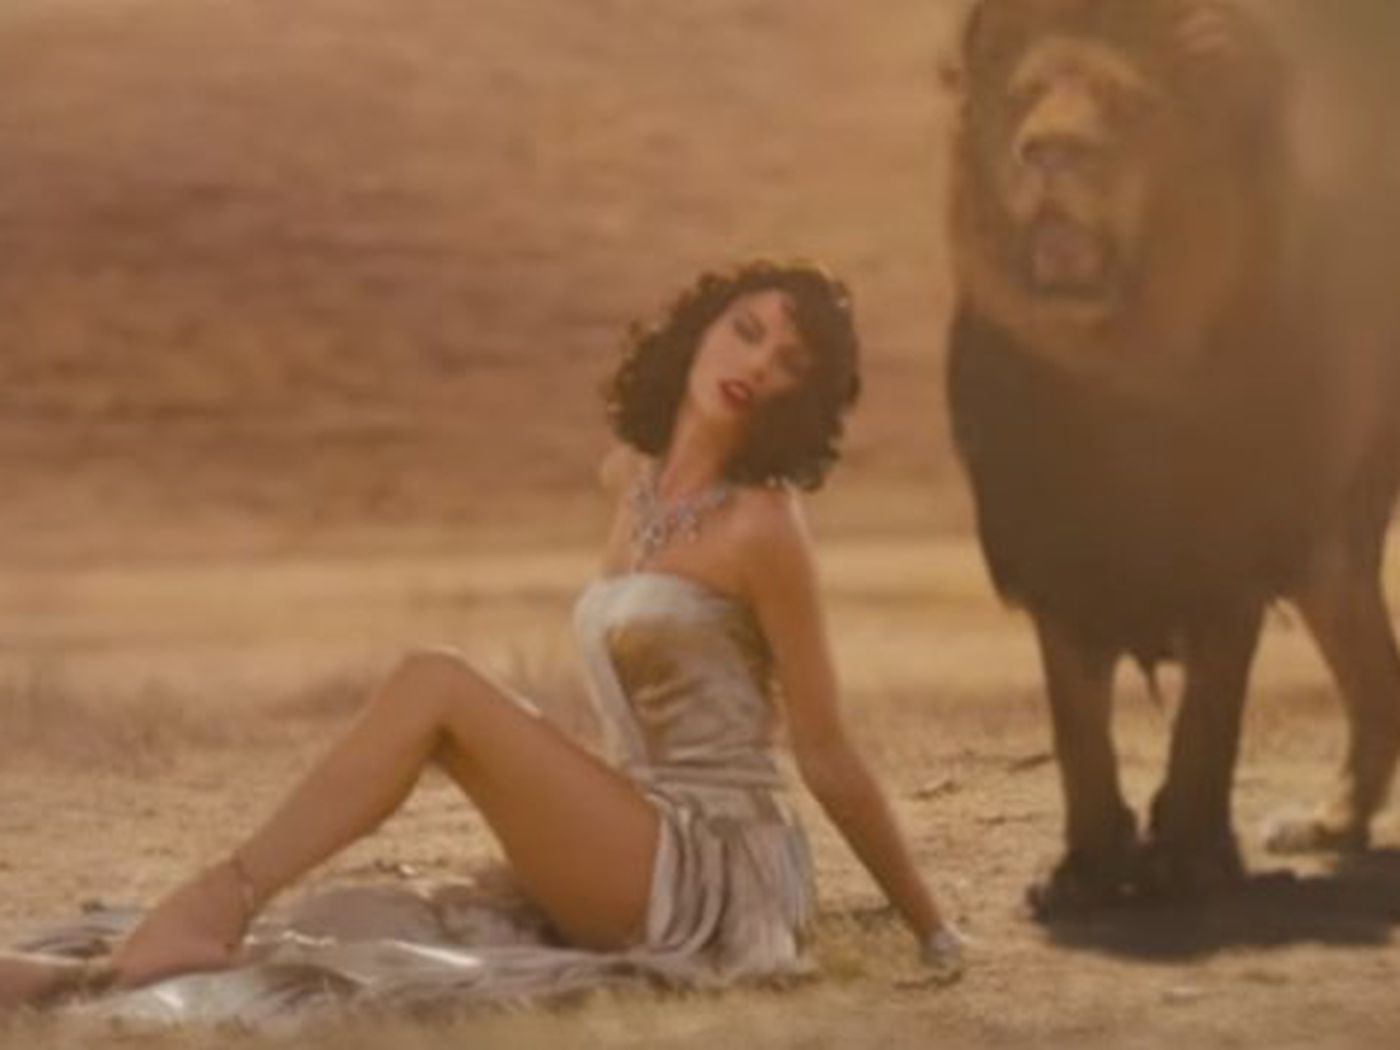 Taylor Swift's Wildest Dreams Video Is Just Like My Grandpa: Racist, But I Love It Anyways Or Die